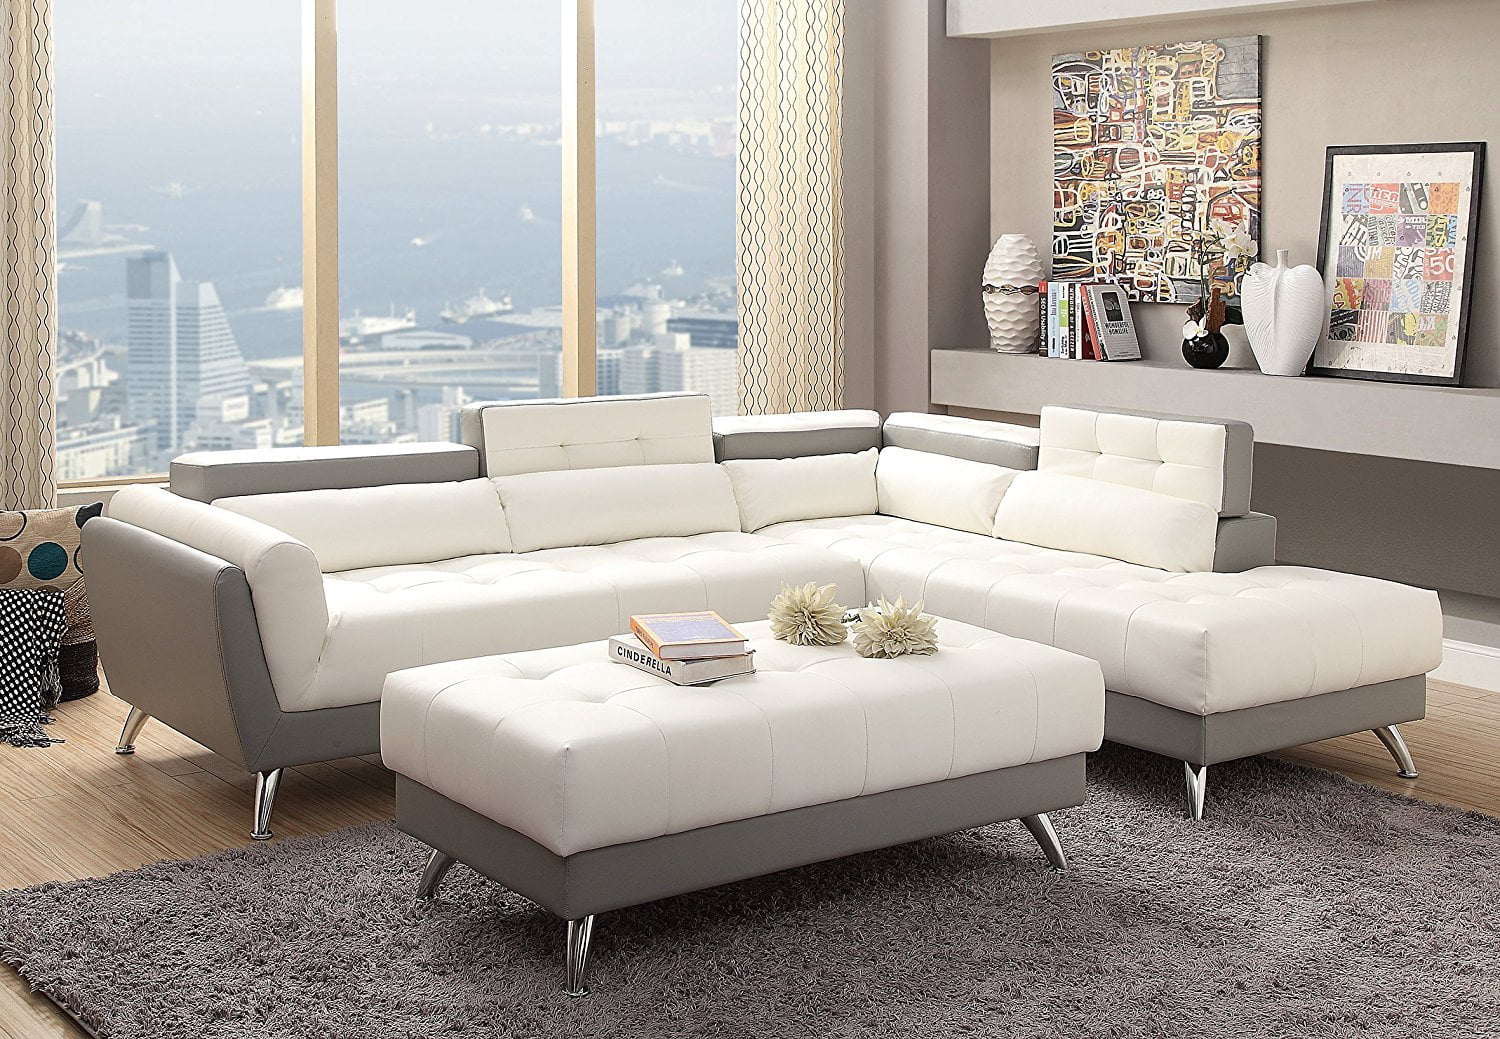 white bonded leather sectional sofa with storage